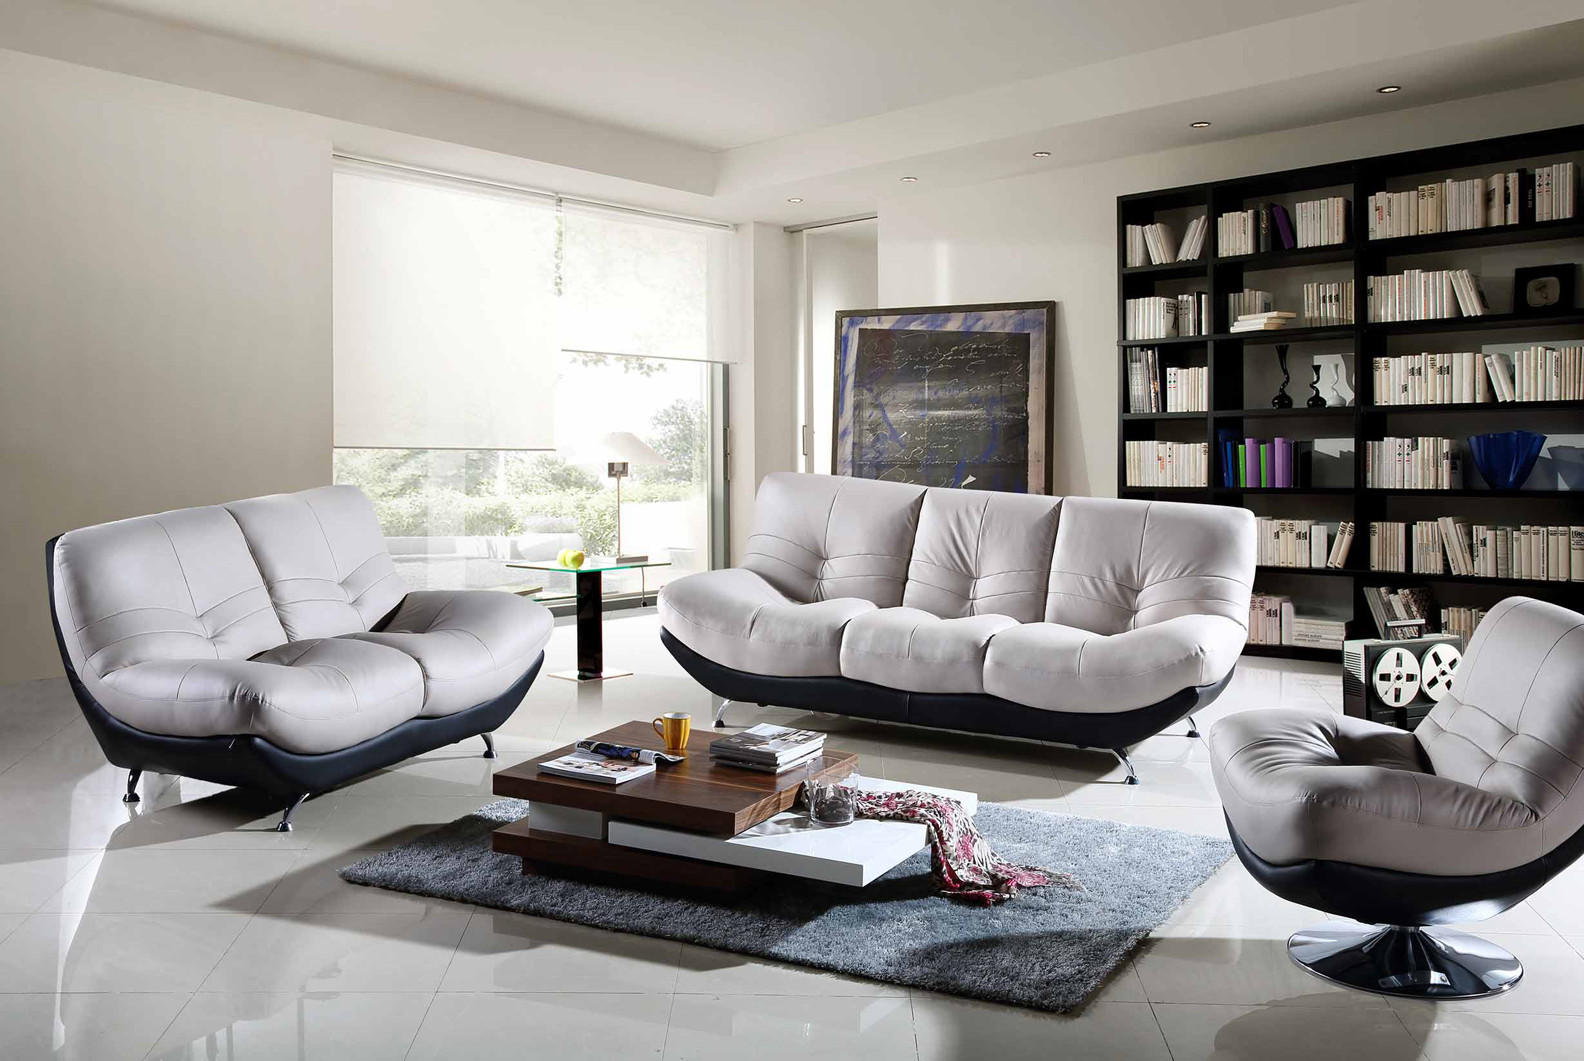 Modern White Living Room Furniture
 line Shopping Furniture Has Many Advantages